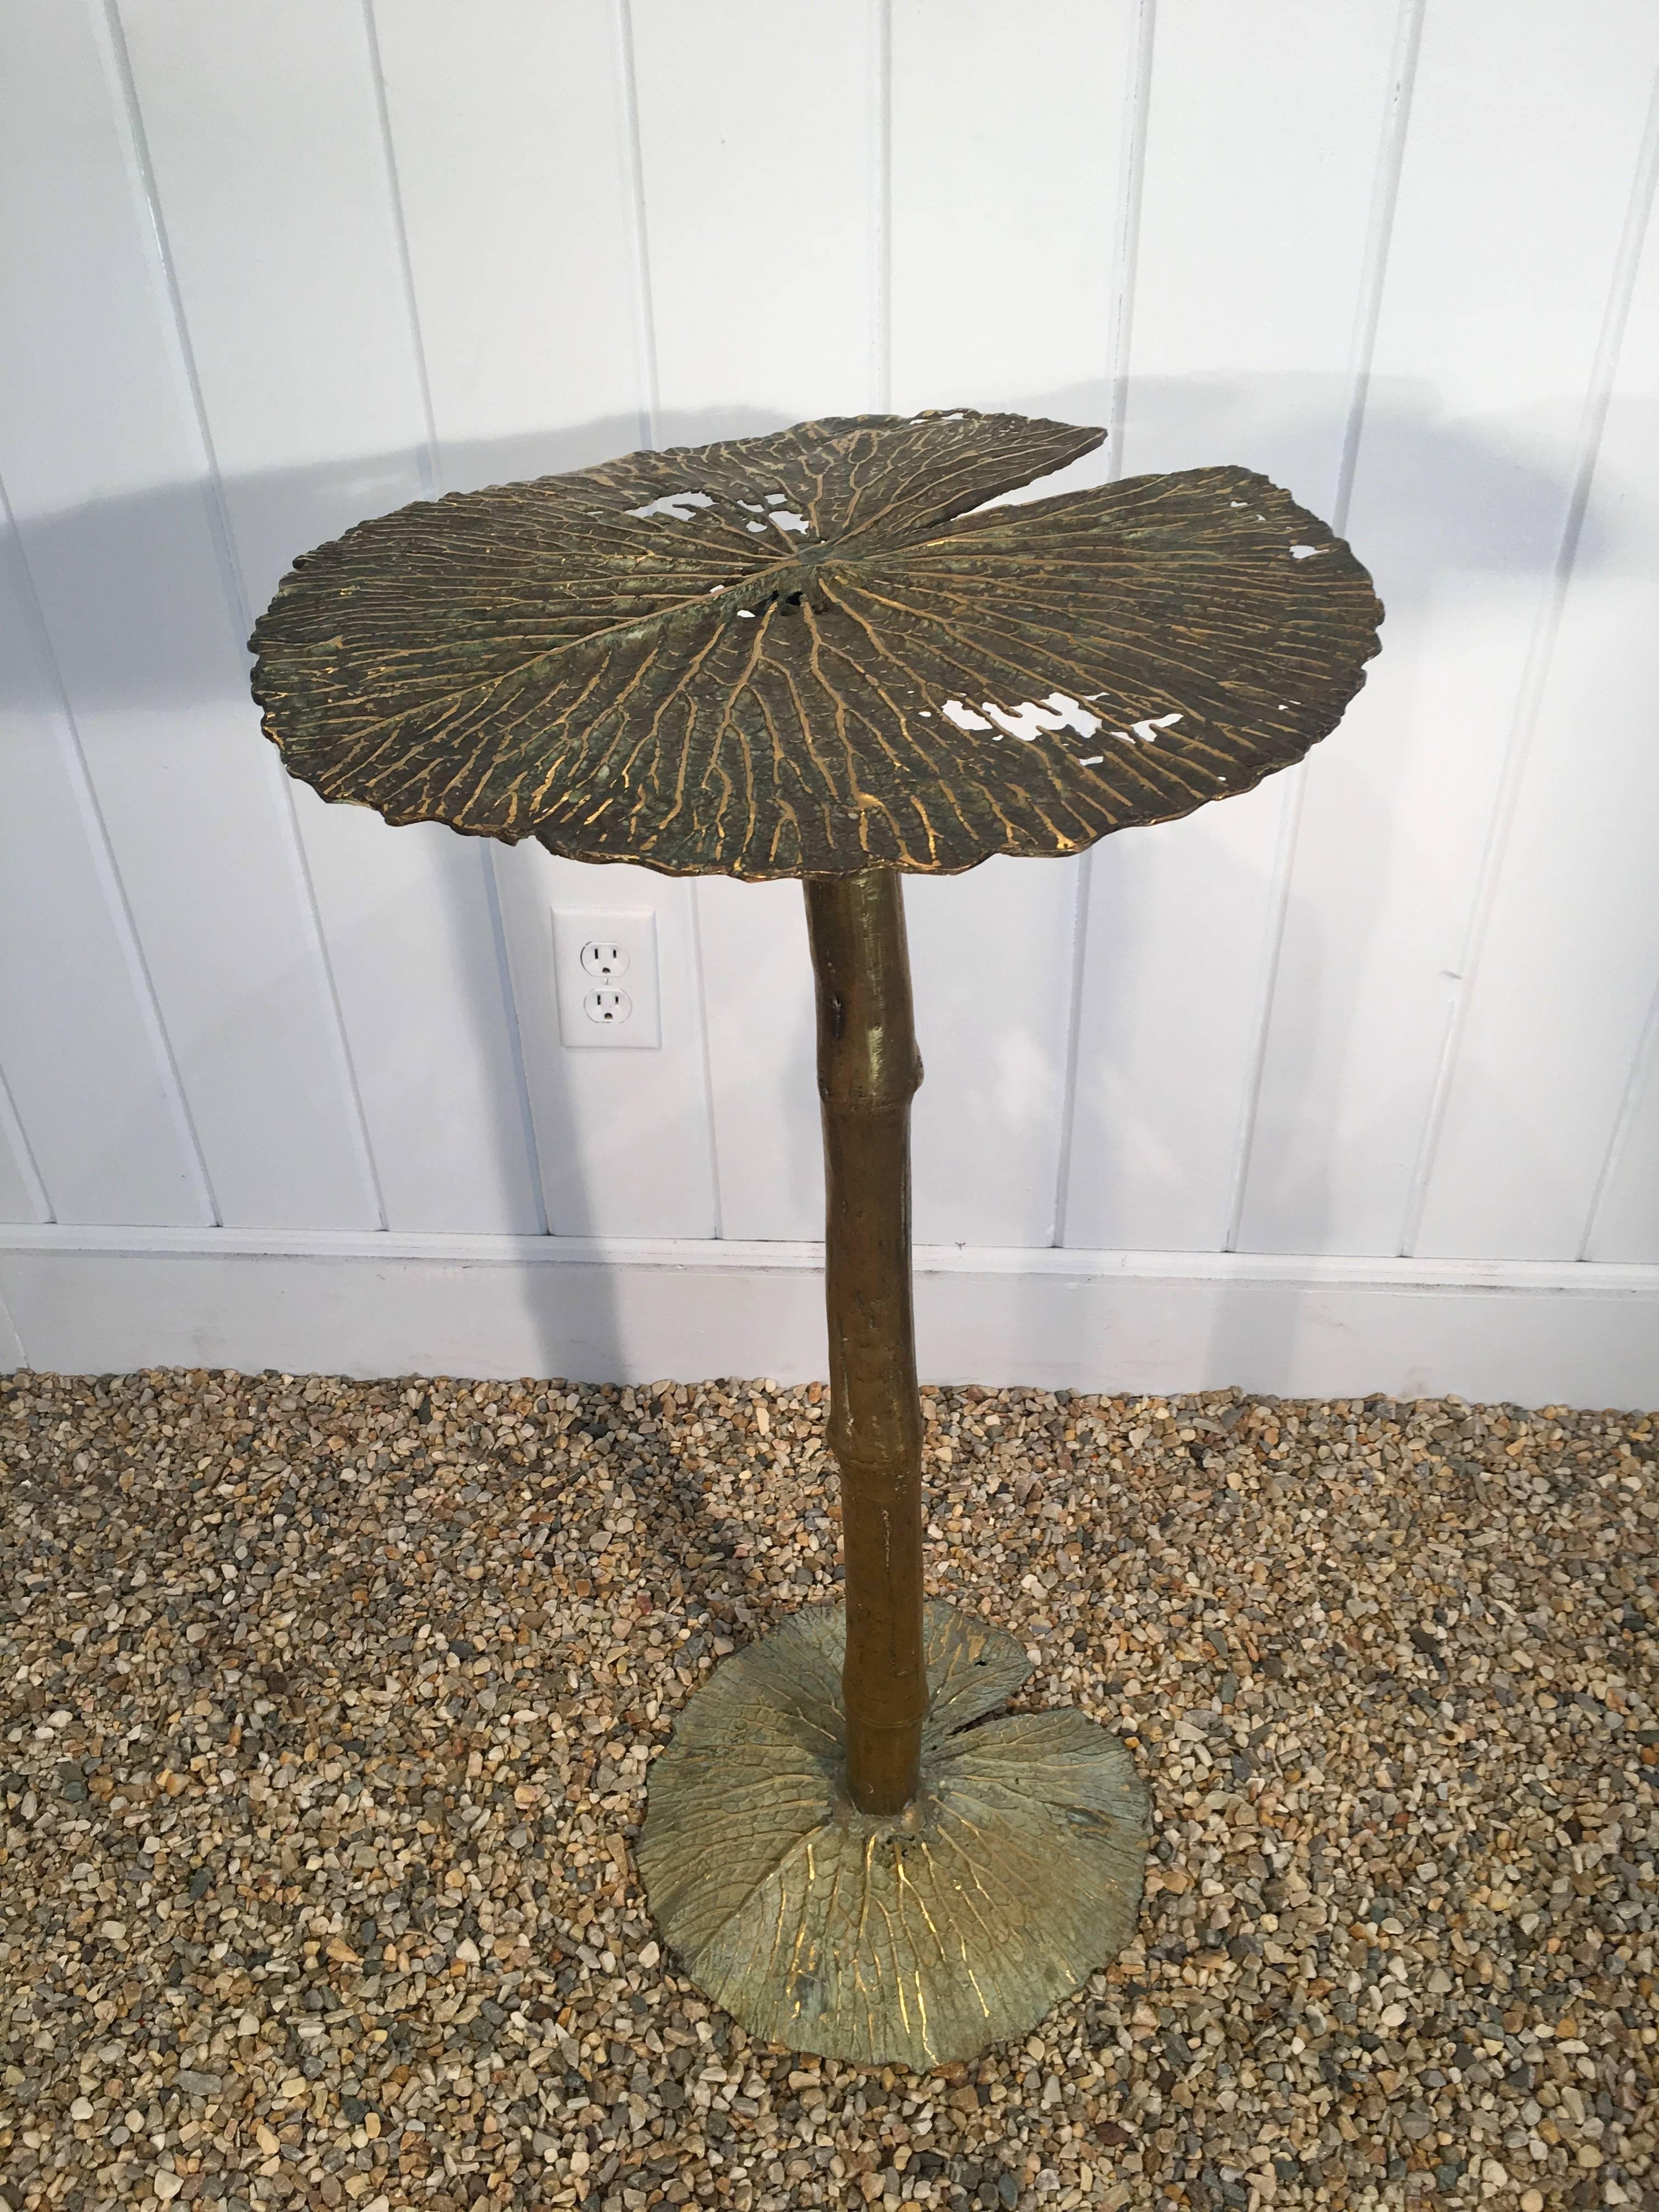 This amazing bronze lily pad leaf table is a one-of-a-kind and was handmade in France by a local artisan. Perfect as a side or drinks table inside or out, it is more sculpture than furniture. The patina is just marvelous. The top measures 16.5